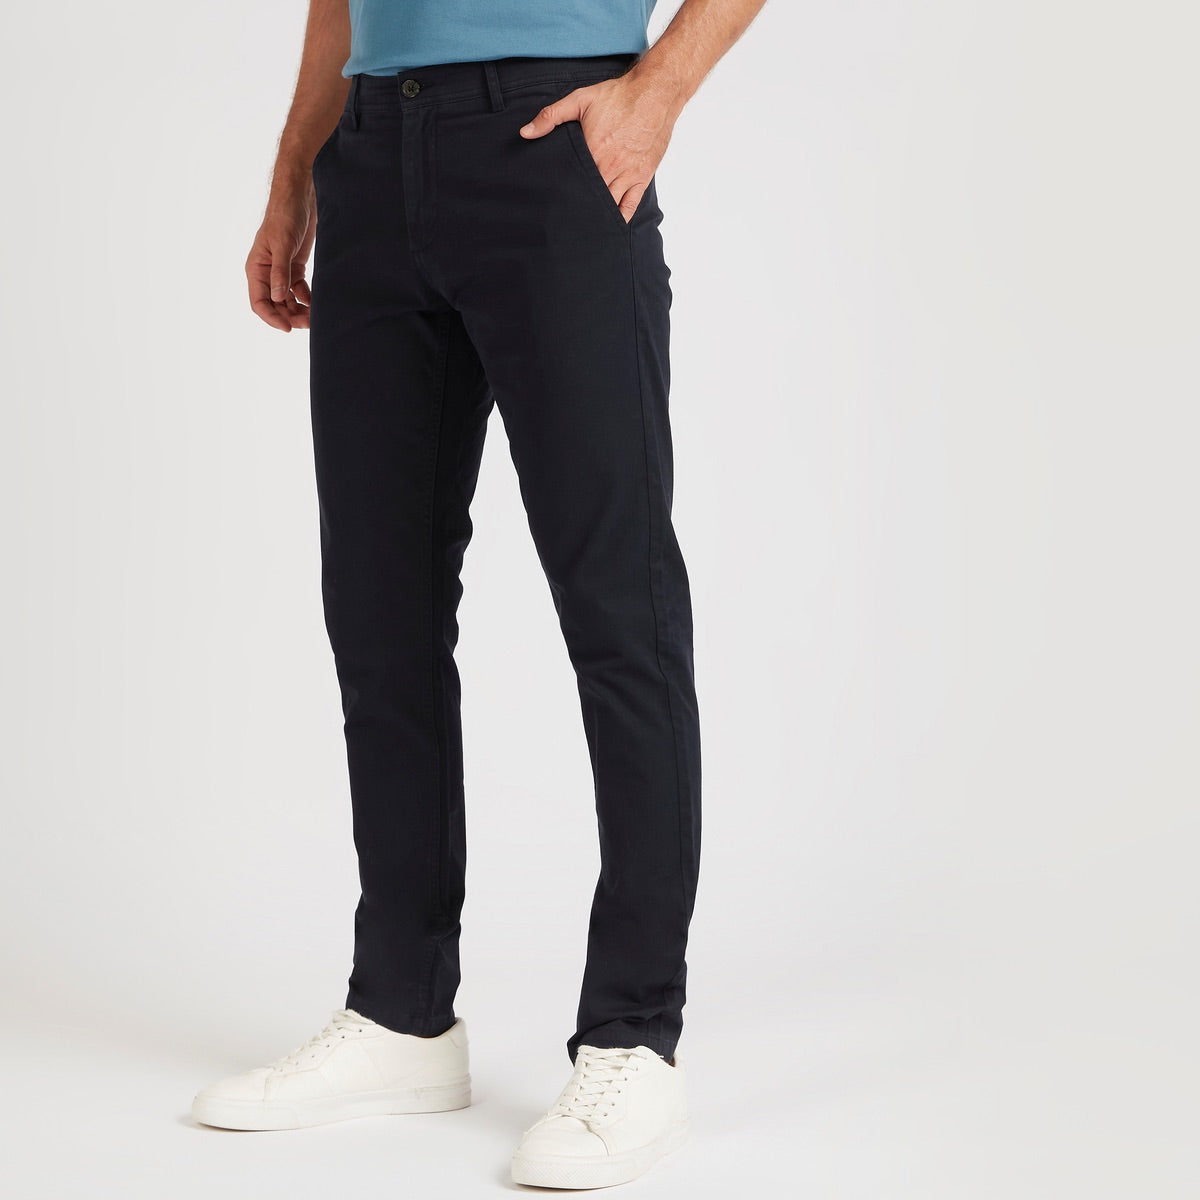 Jet Black Solid Chinos with Pockets and Button Closure